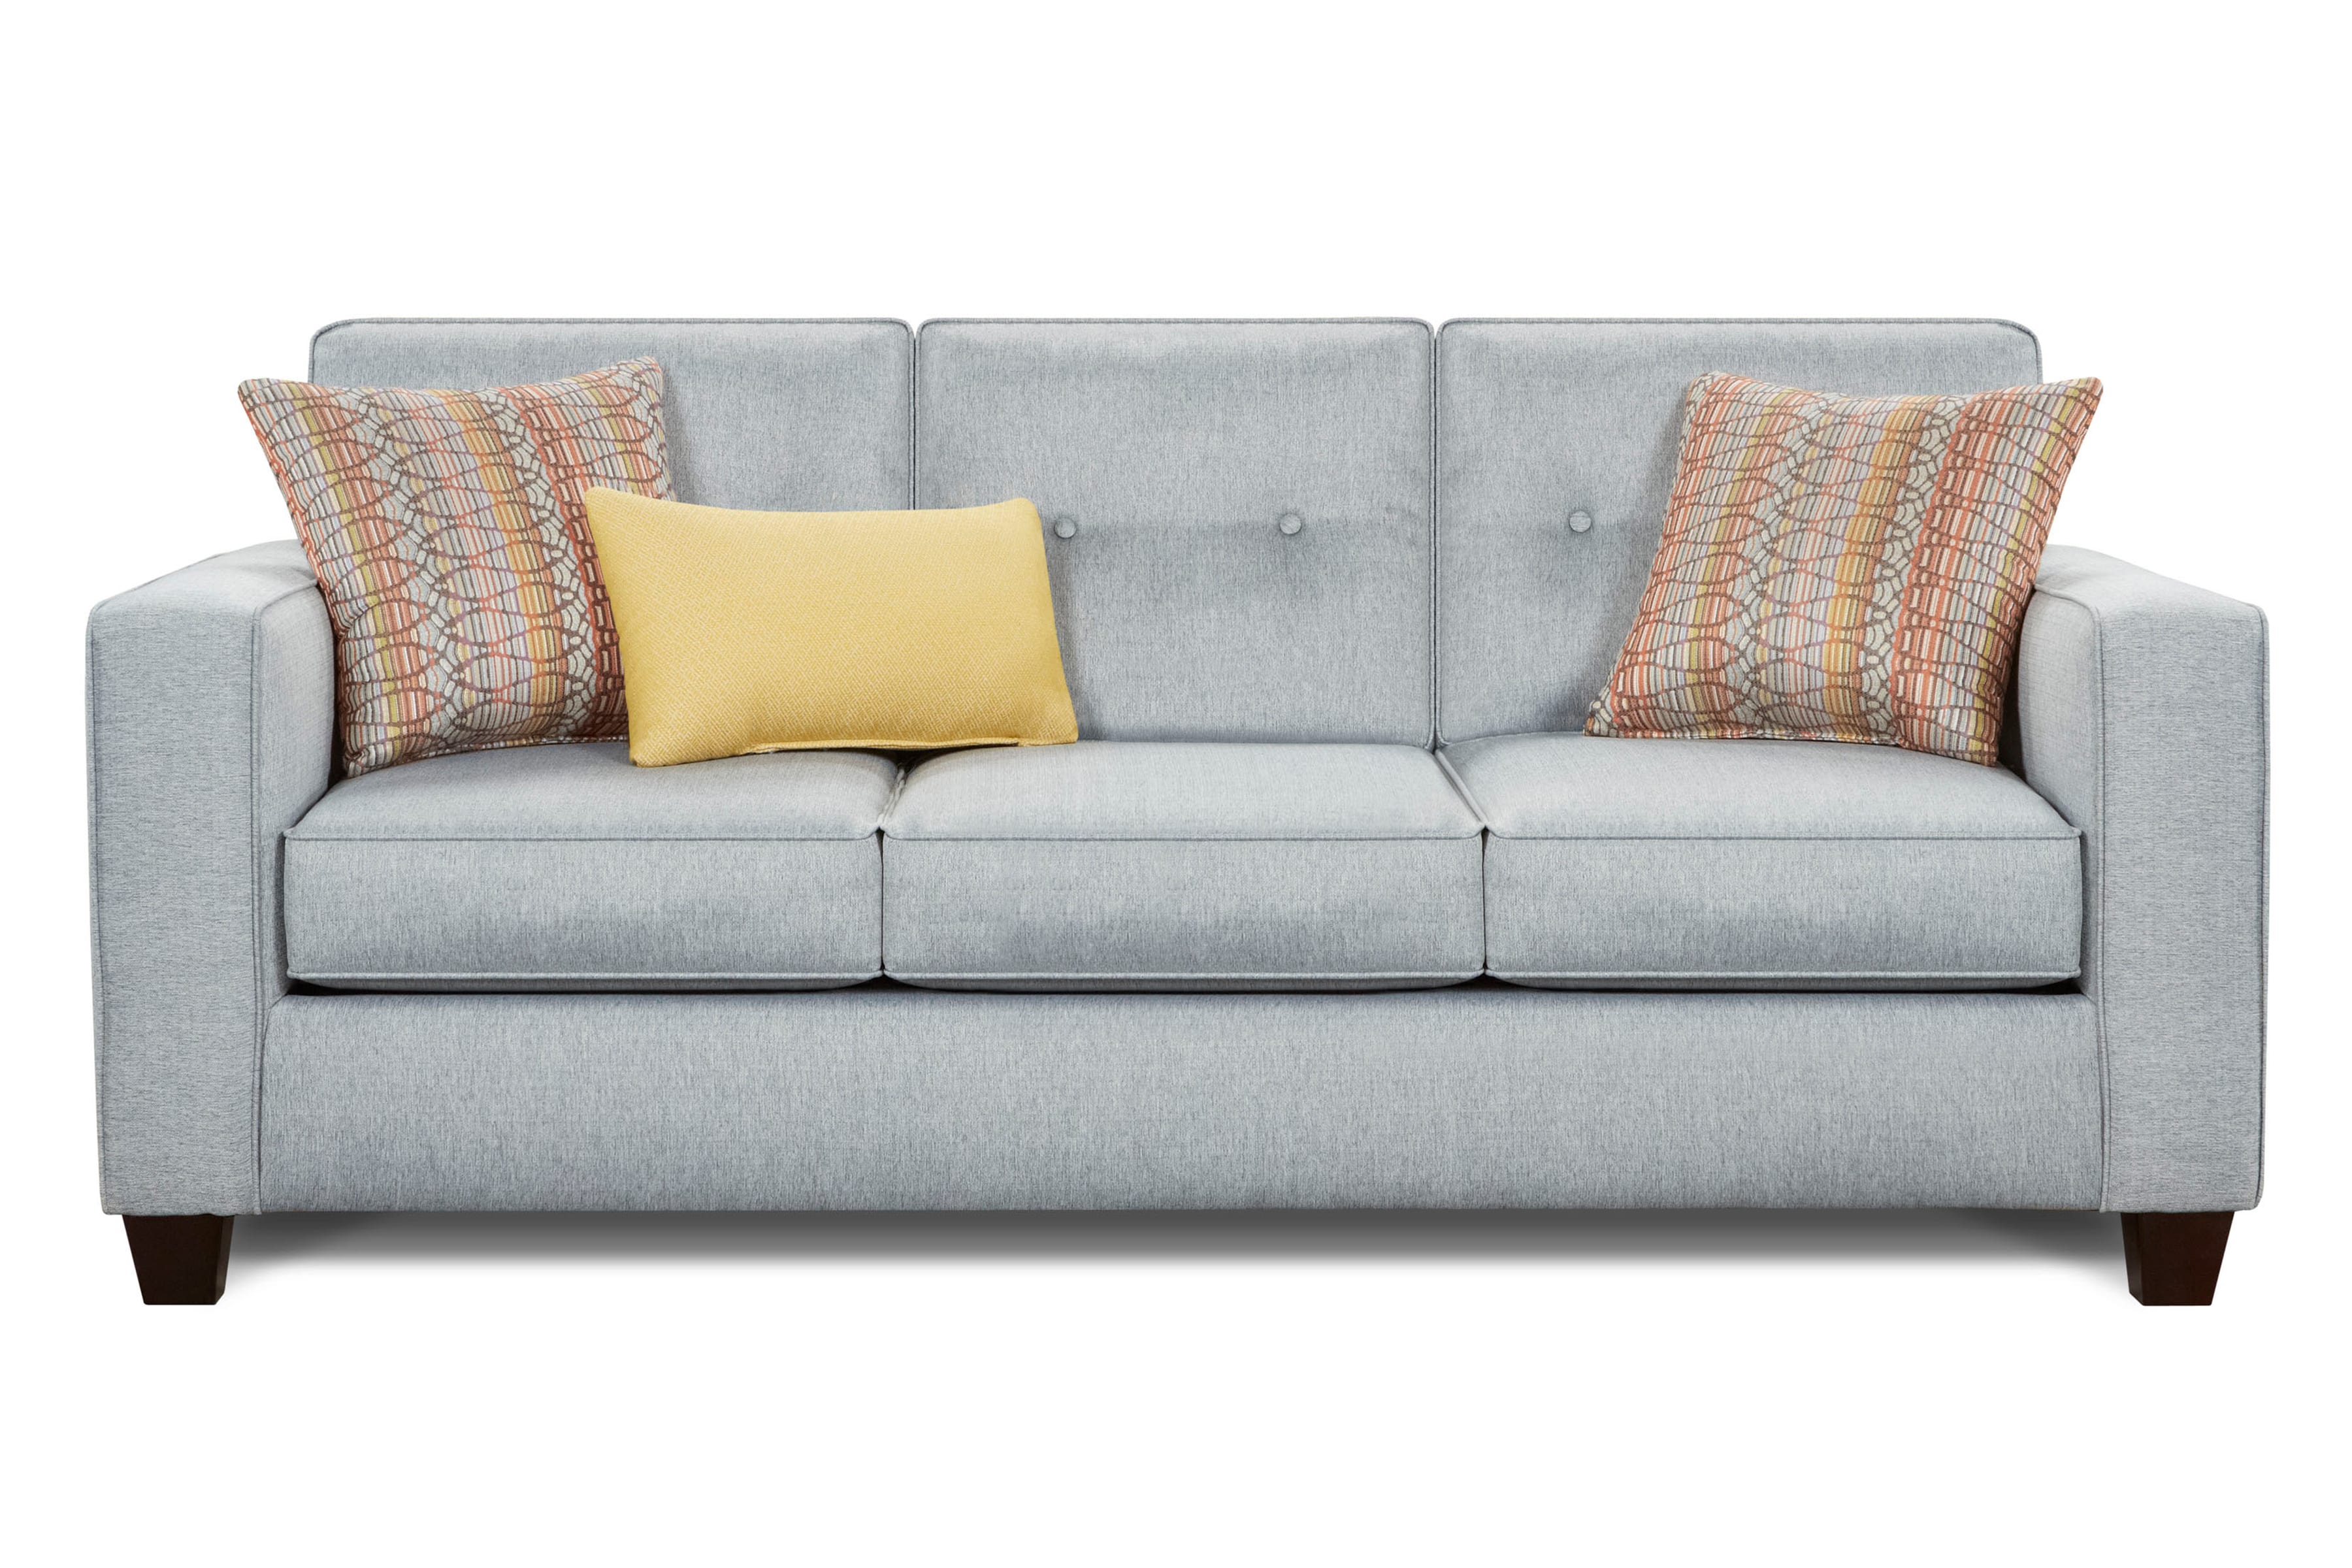 Furniture Options Couch